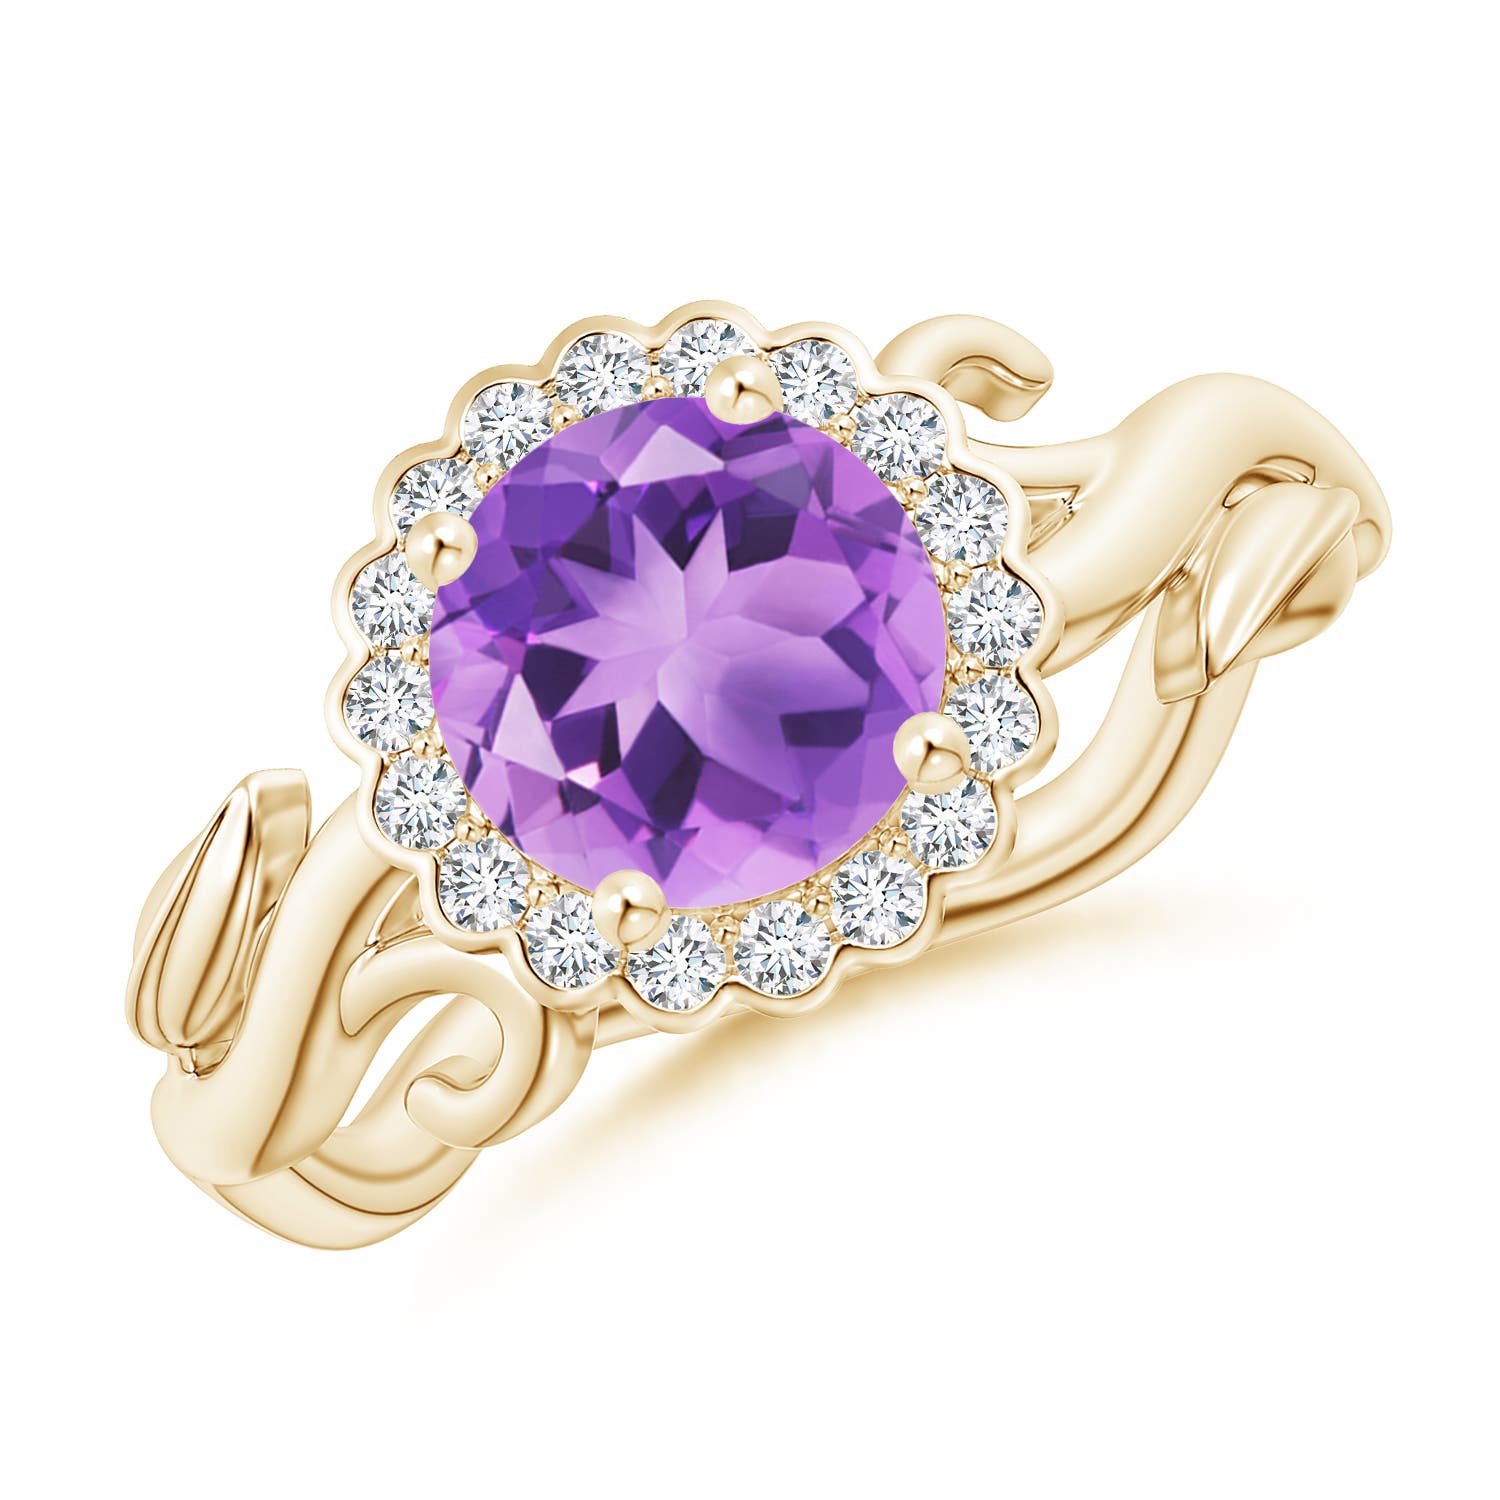 A - Amethyst / 1.33 CT / 14 KT Yellow Gold